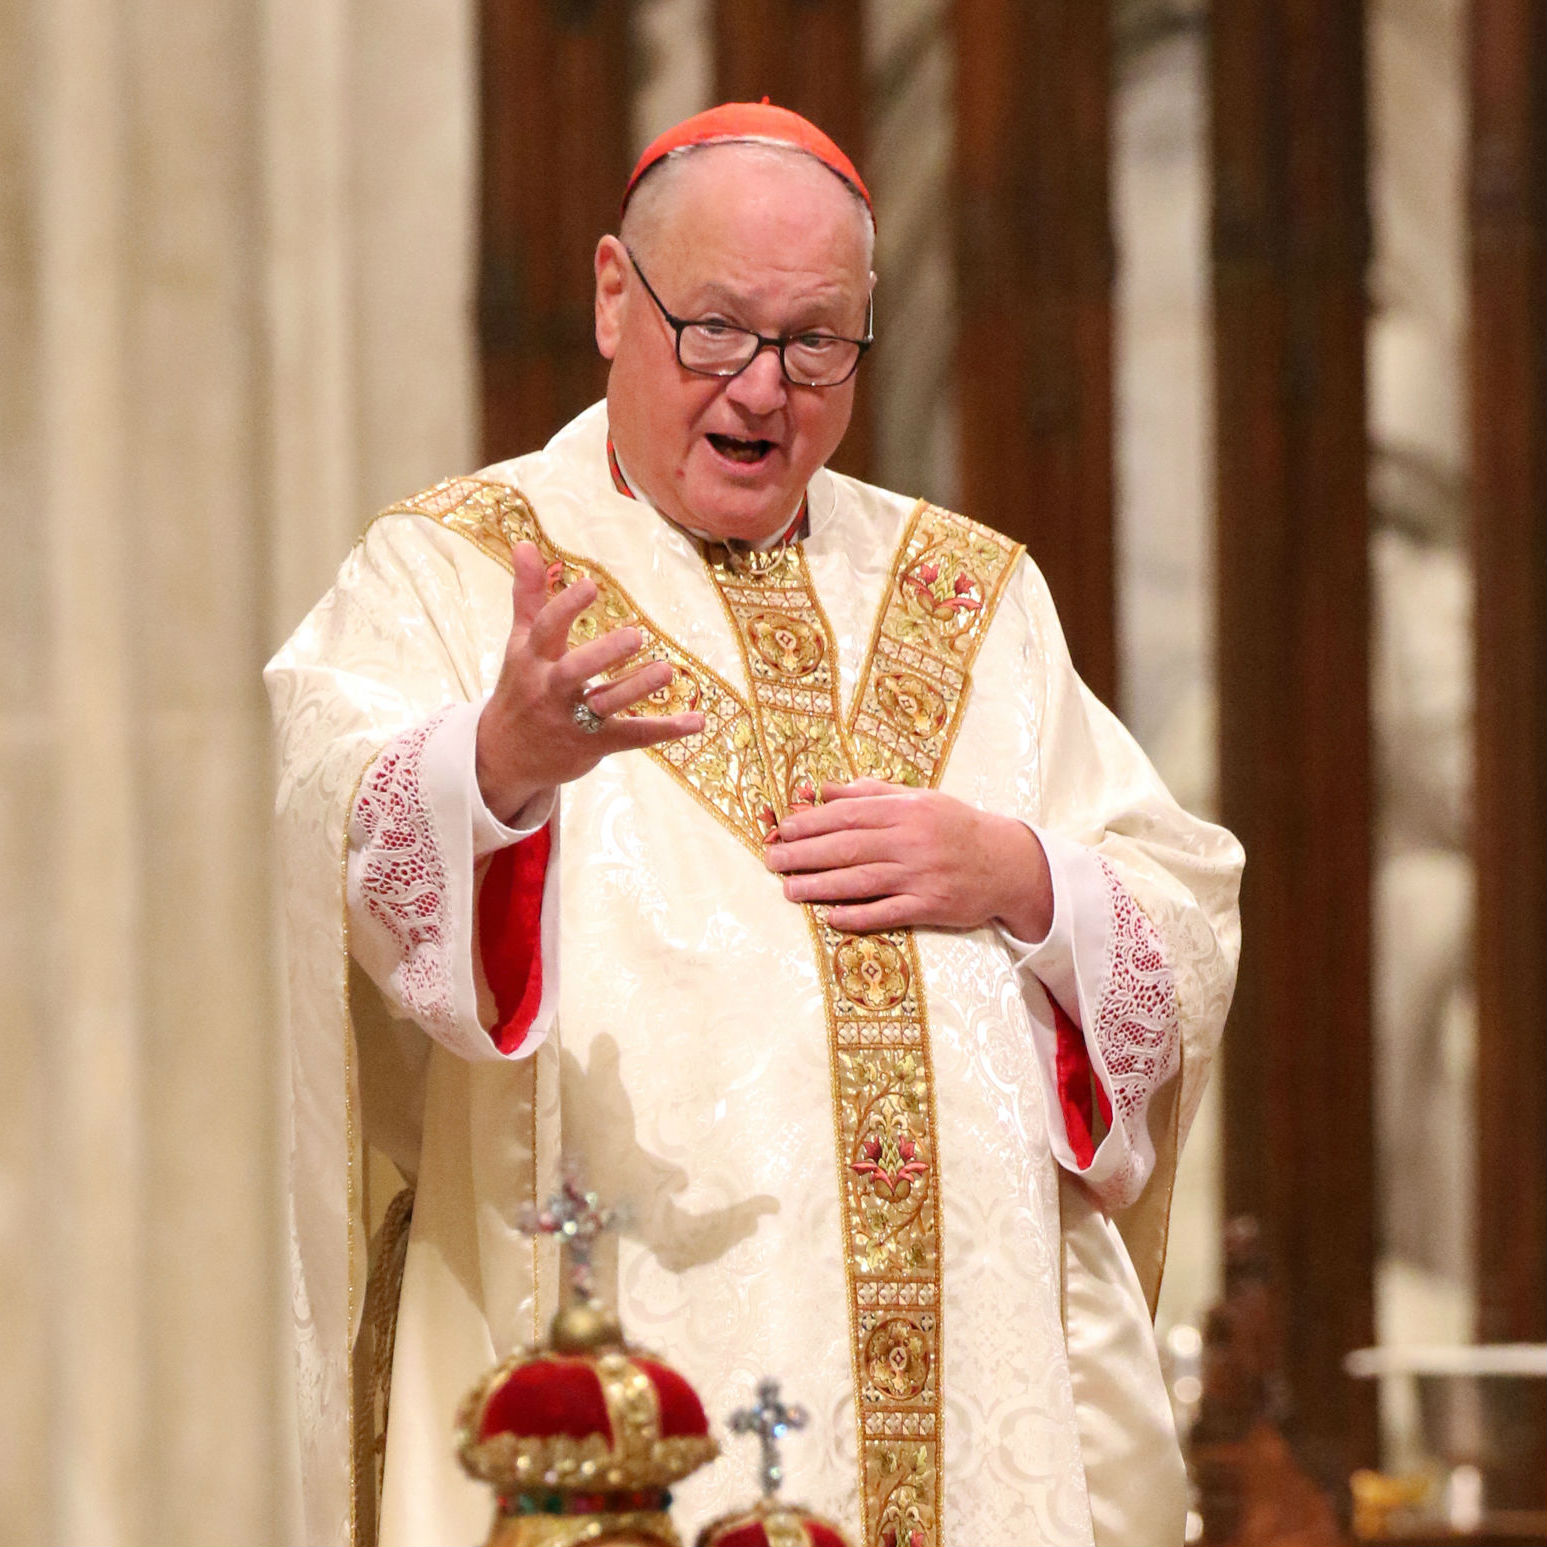 Cardinal calls all to pray Supreme Court will move to protect life in law